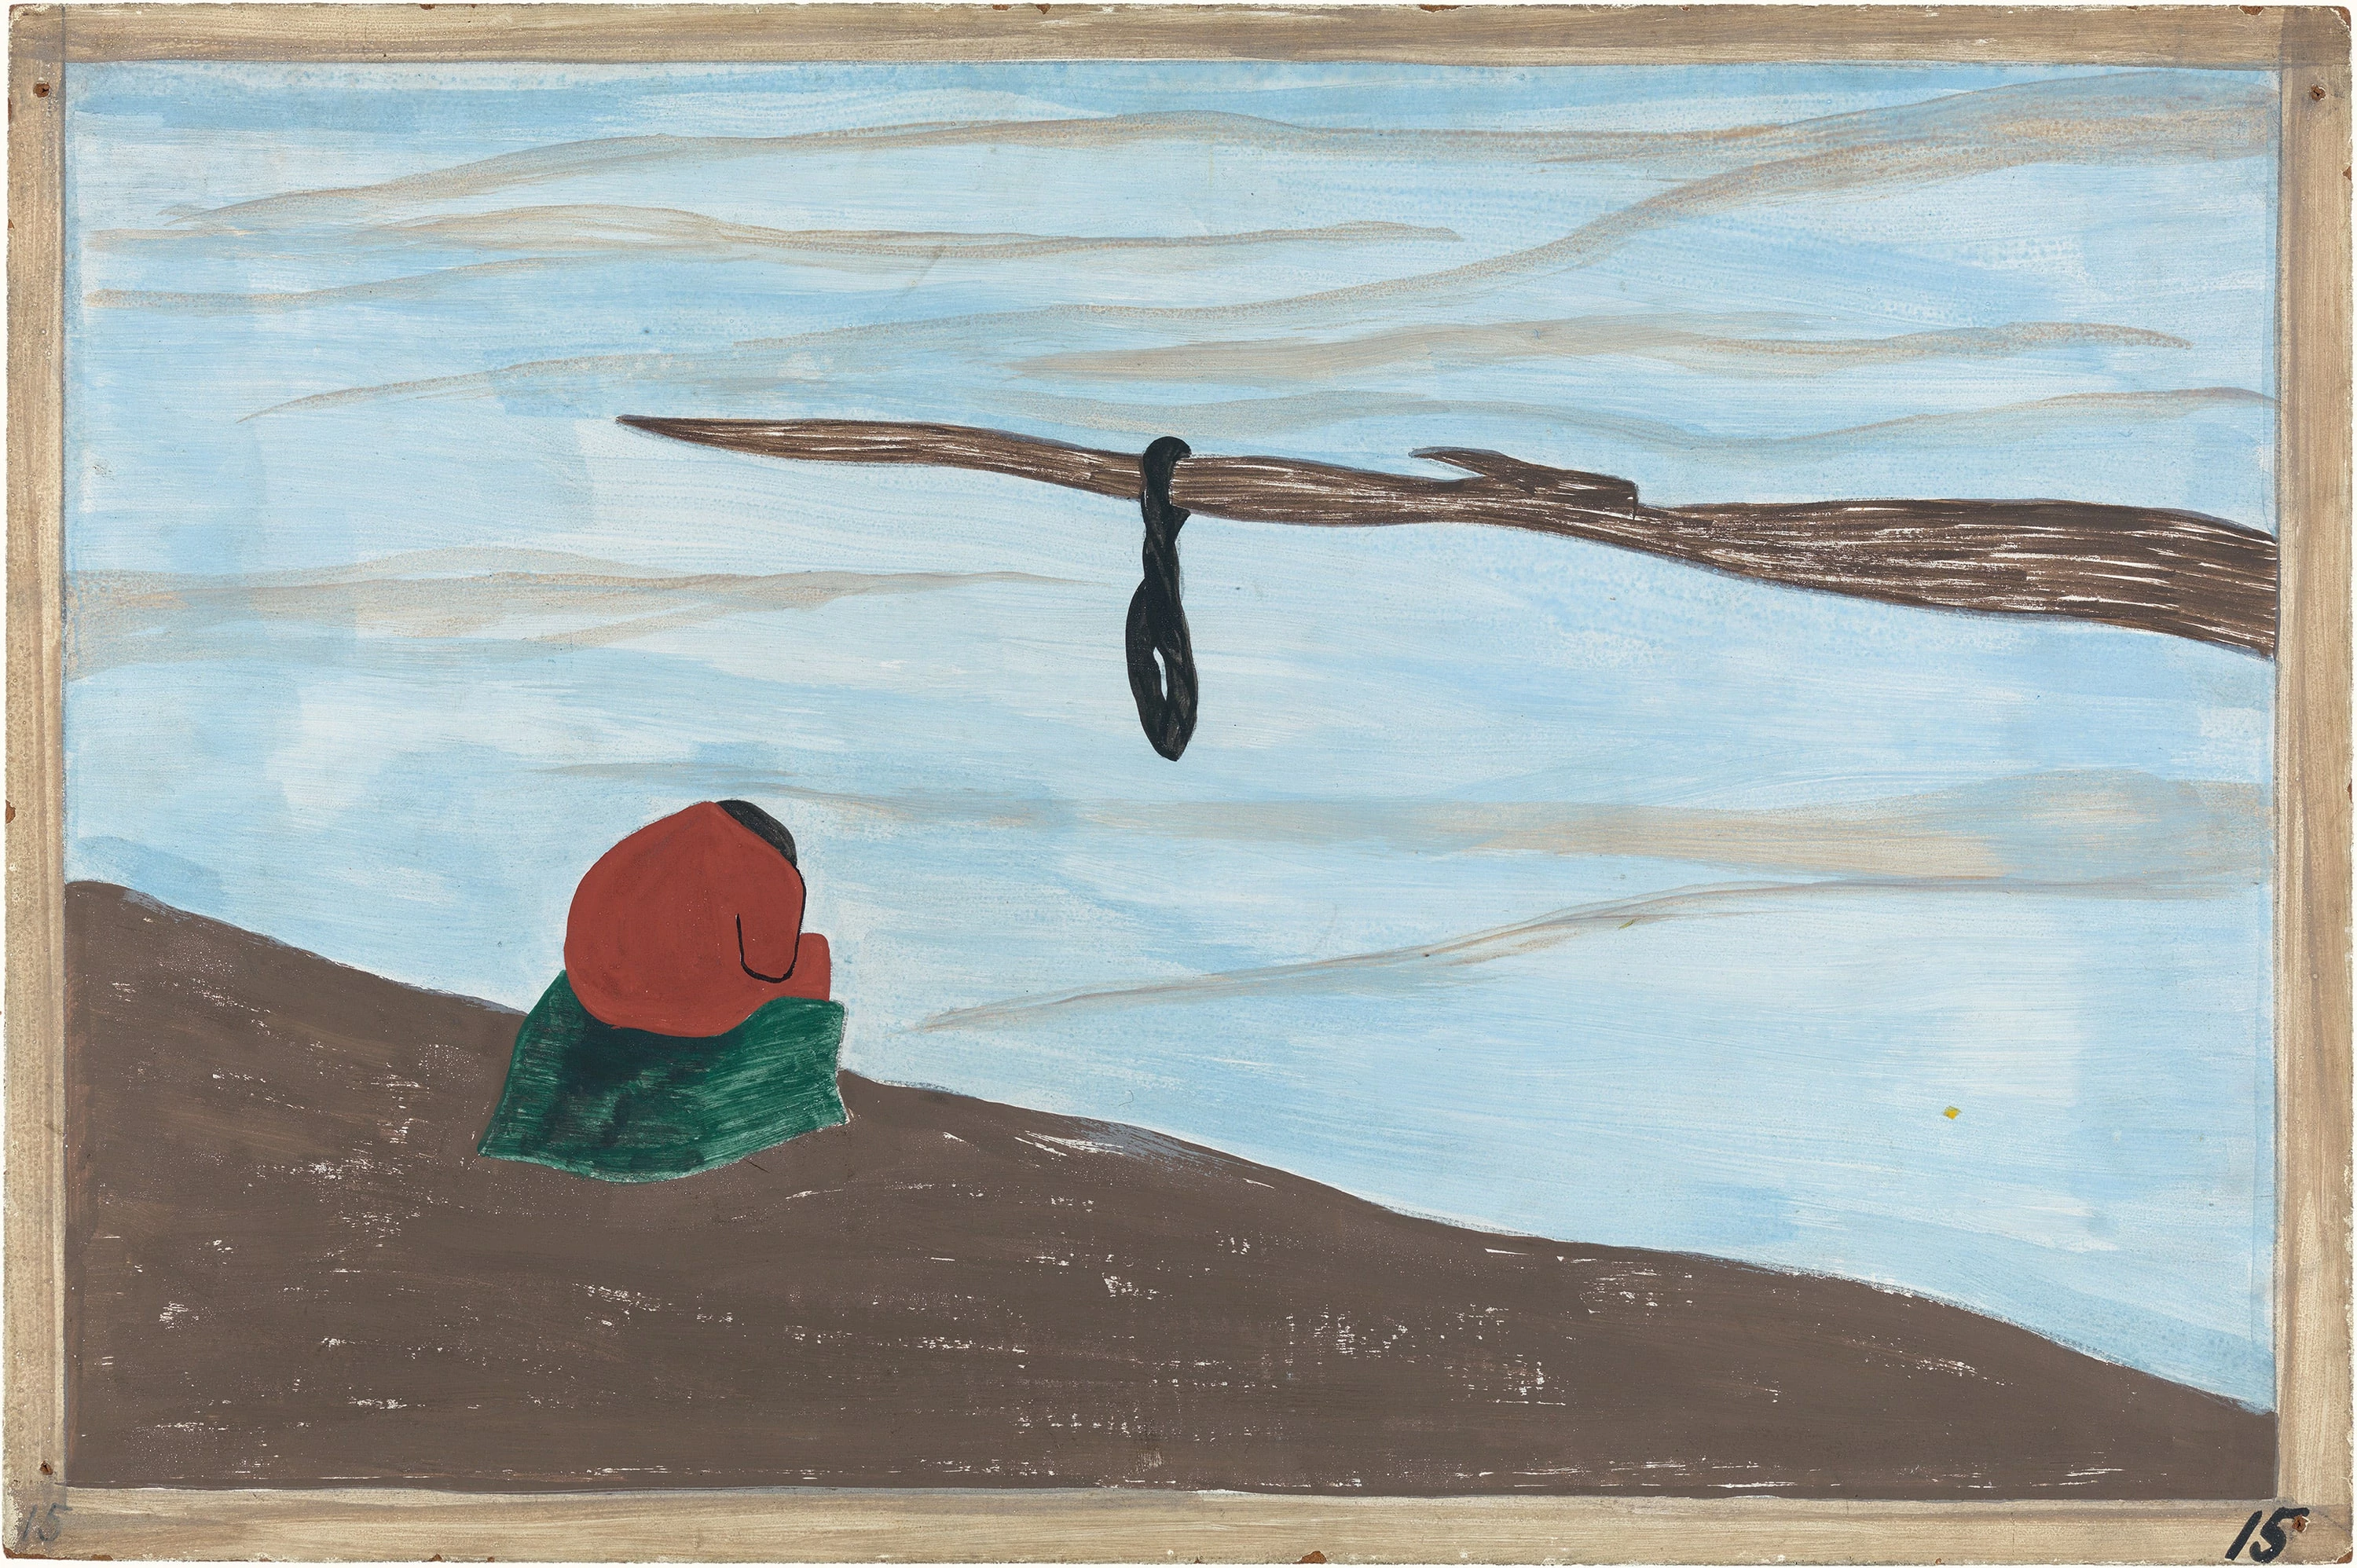 Migration Series No.15: There were lynchings, Jacob Lawrence